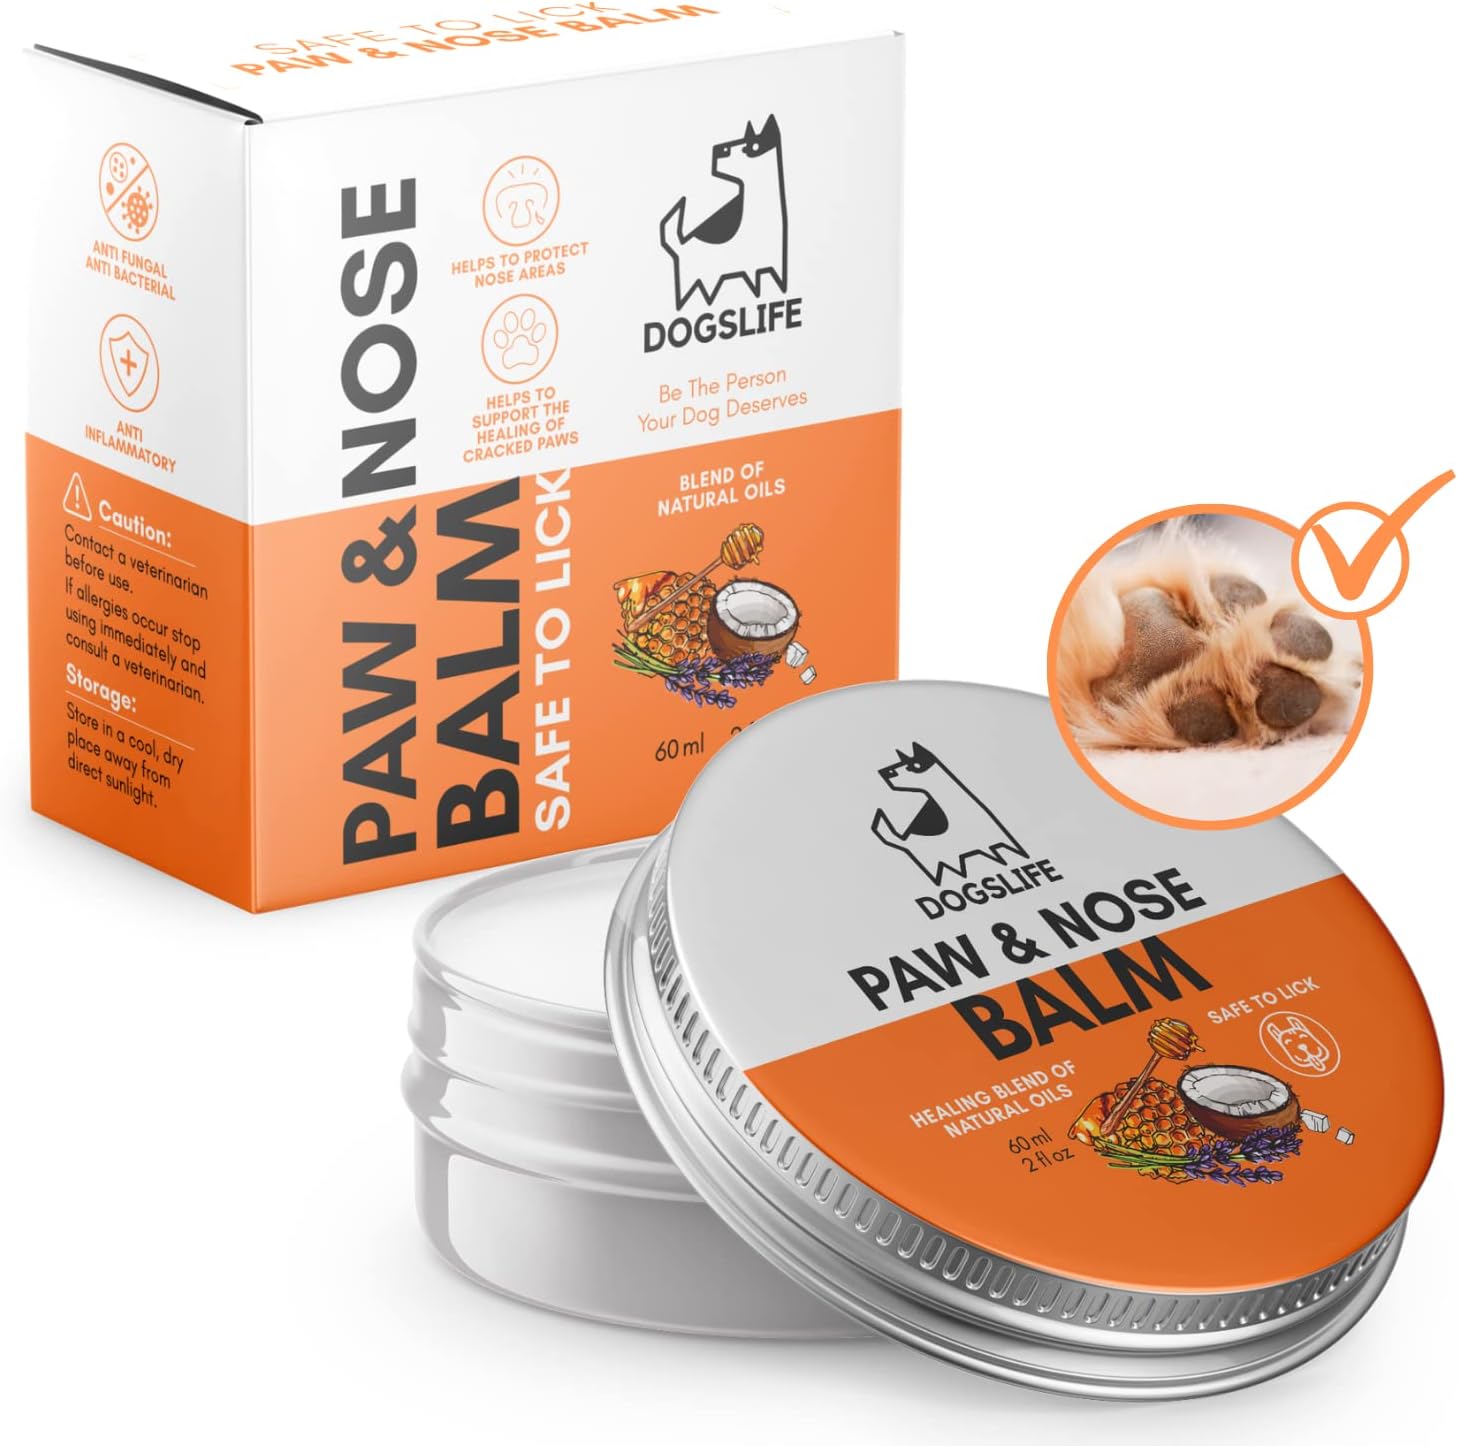 Organic Dog Paw & Nose Balm | 100% Natural Paw & Nose Balm To Repair Cracked Paws & Itchy Noses | Anti Fungal Paw Cream & Lick Safe Protection For Dogs Paws & Noses?DG19